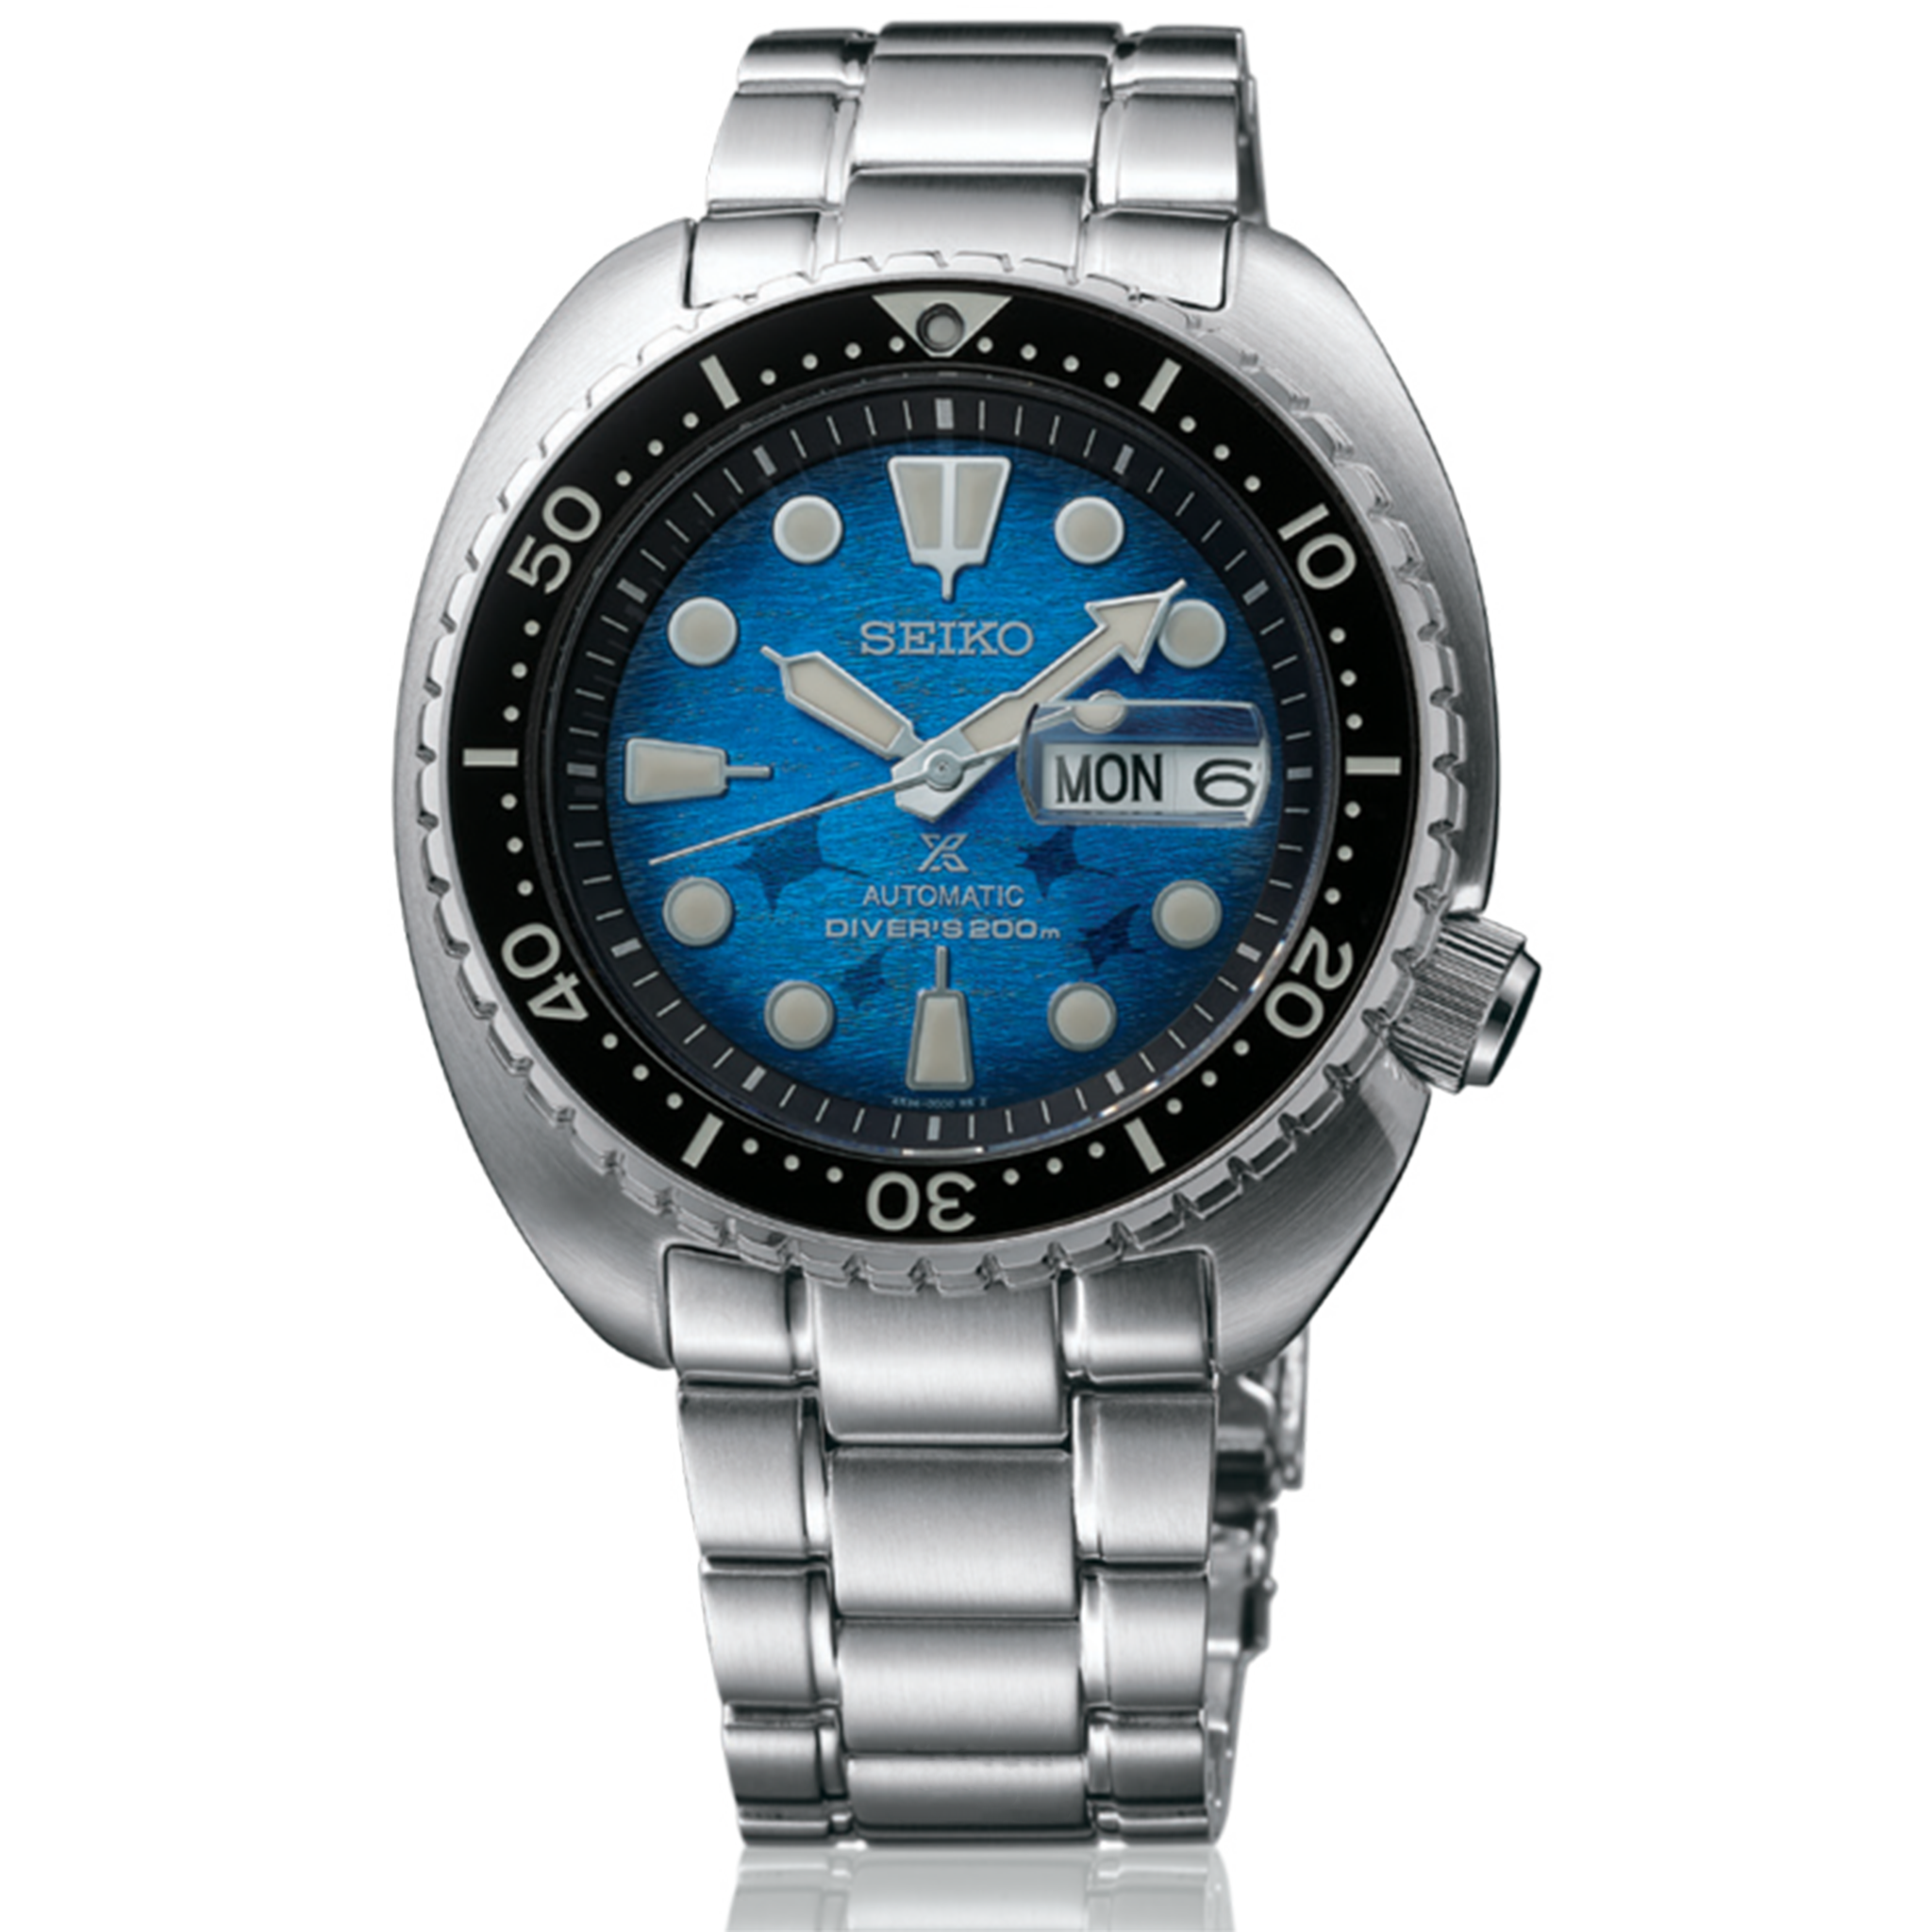 Seiko PROSPEX King Turtle Save The Ocean Great White For $650 For Sale From  A Seller On Chrono24 